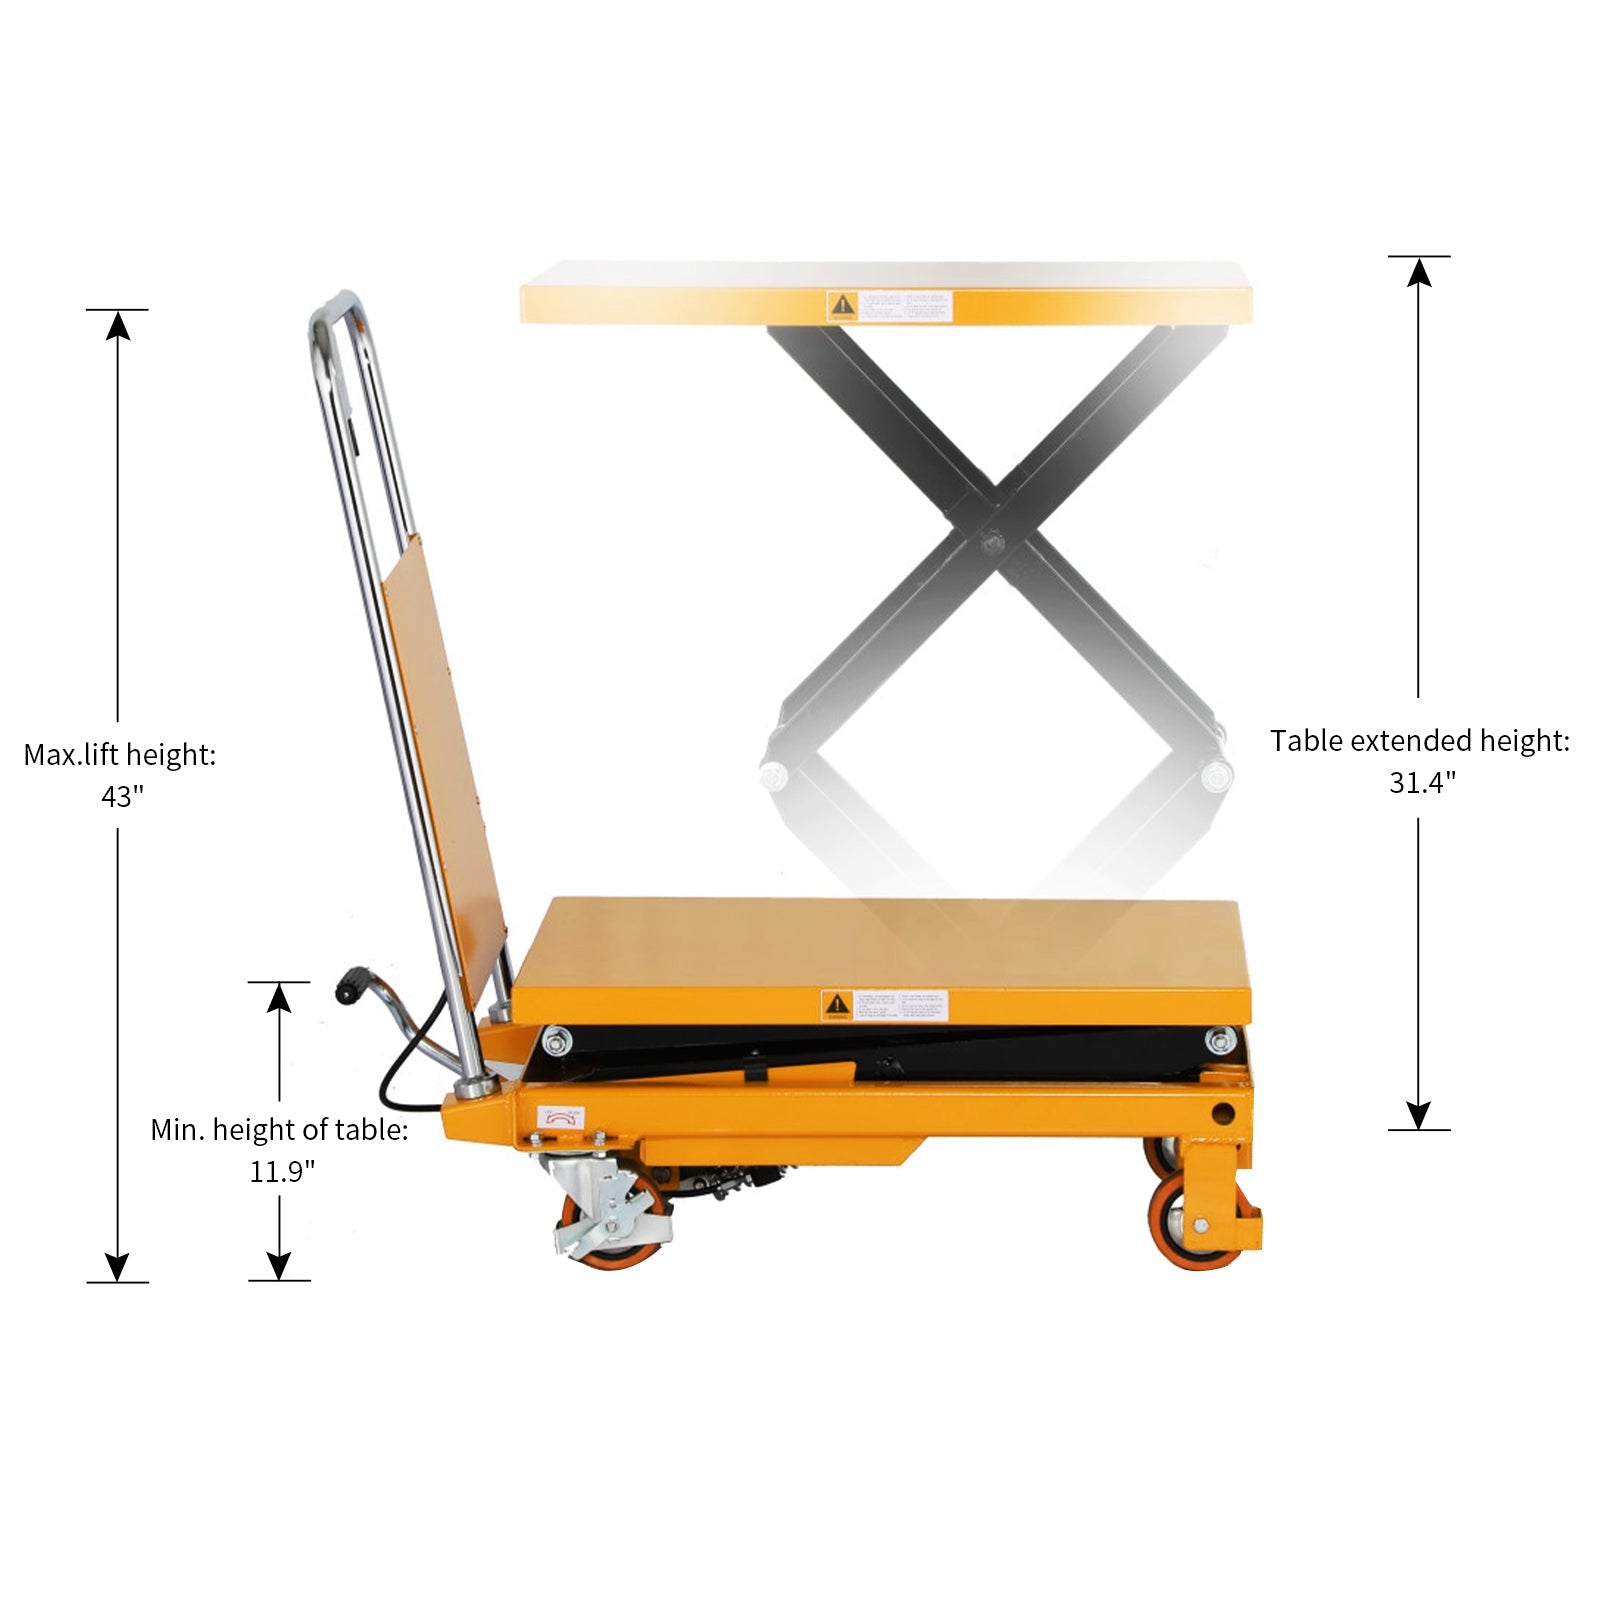 ApolloLift | Double Scissor Lift Table 330lbs 43.3" Lifting Height